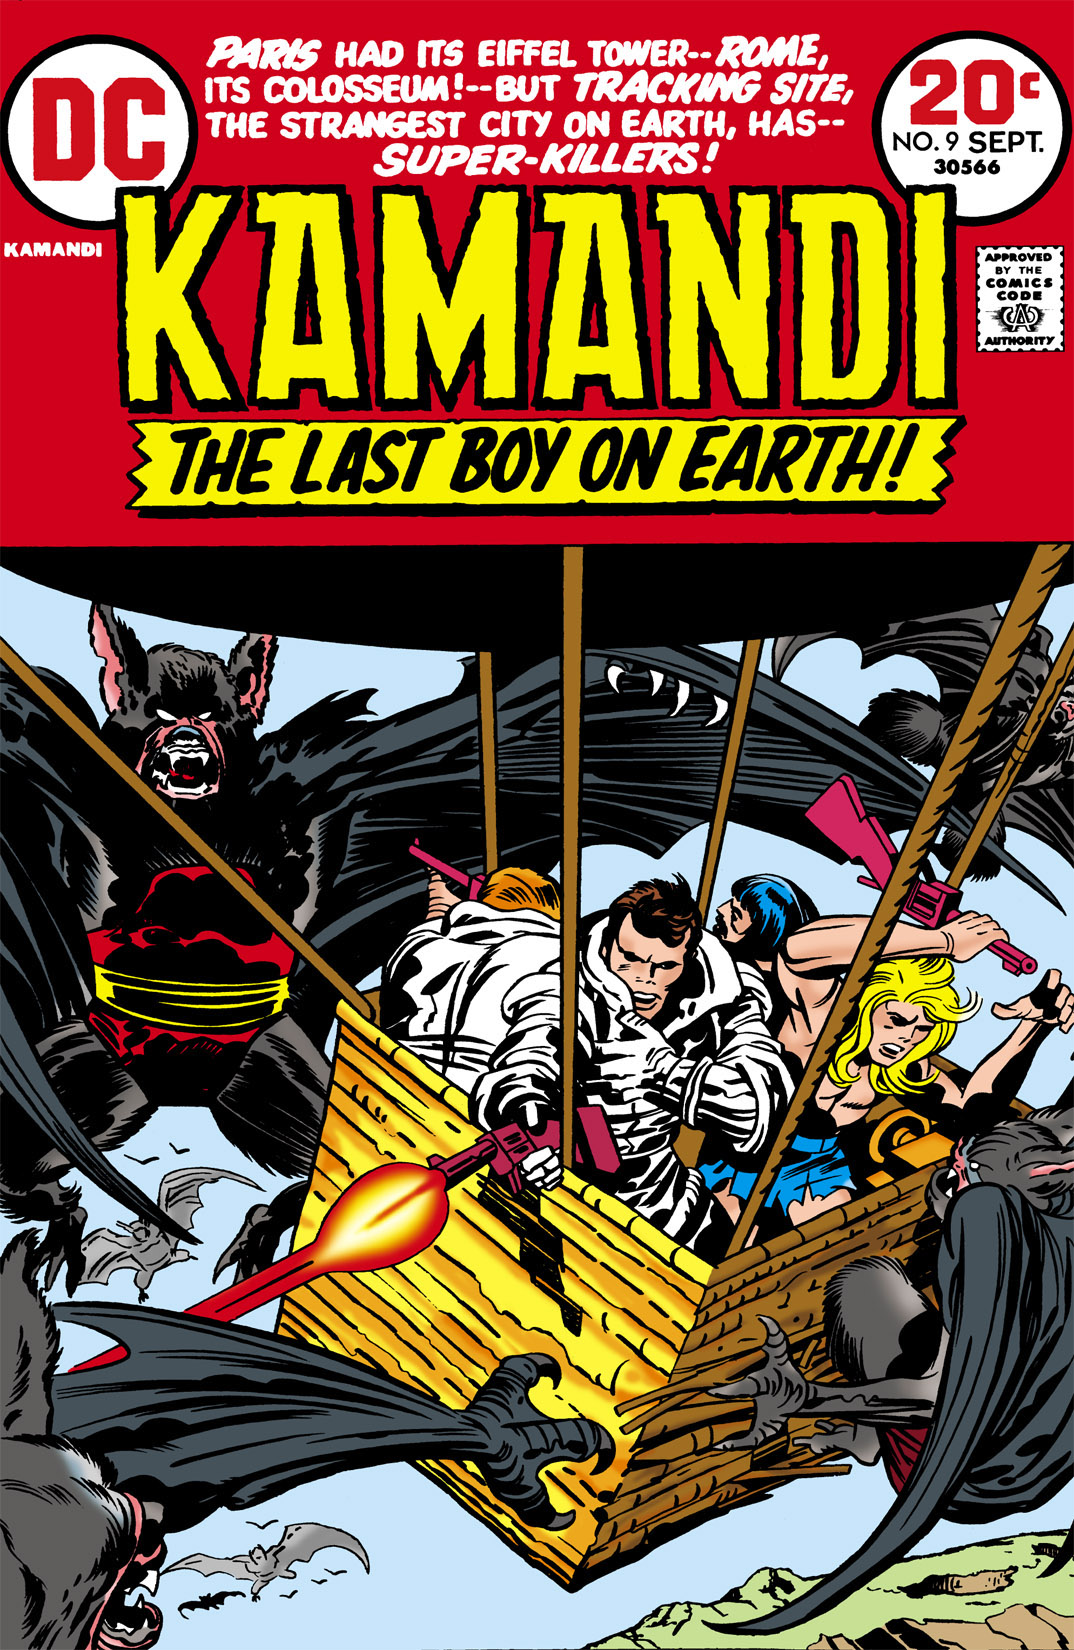 Kamandi: The Last Boy on Earth #9 preview images